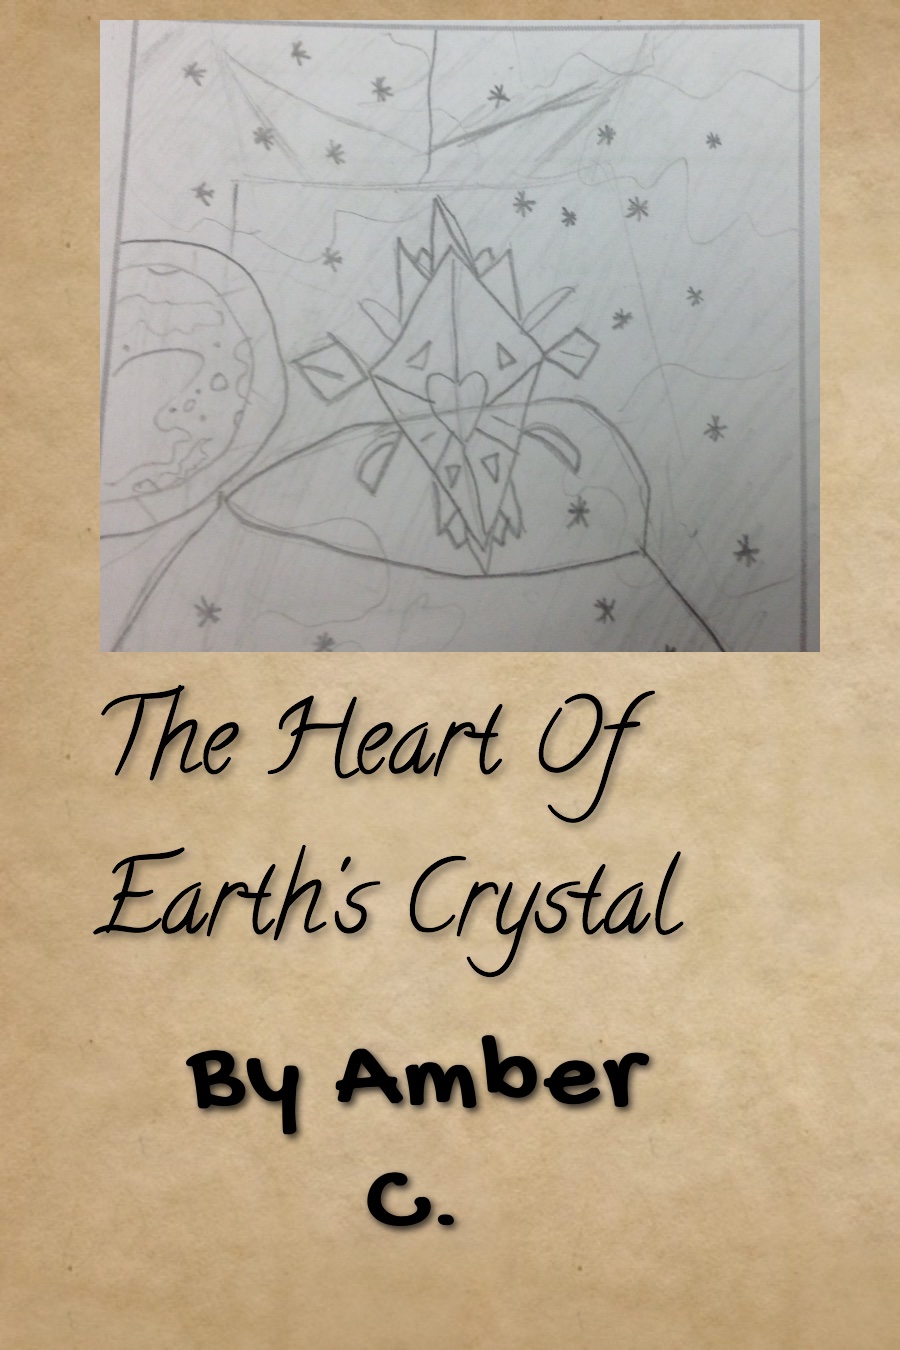 The Heart of Earth’s Crystal by Amber C